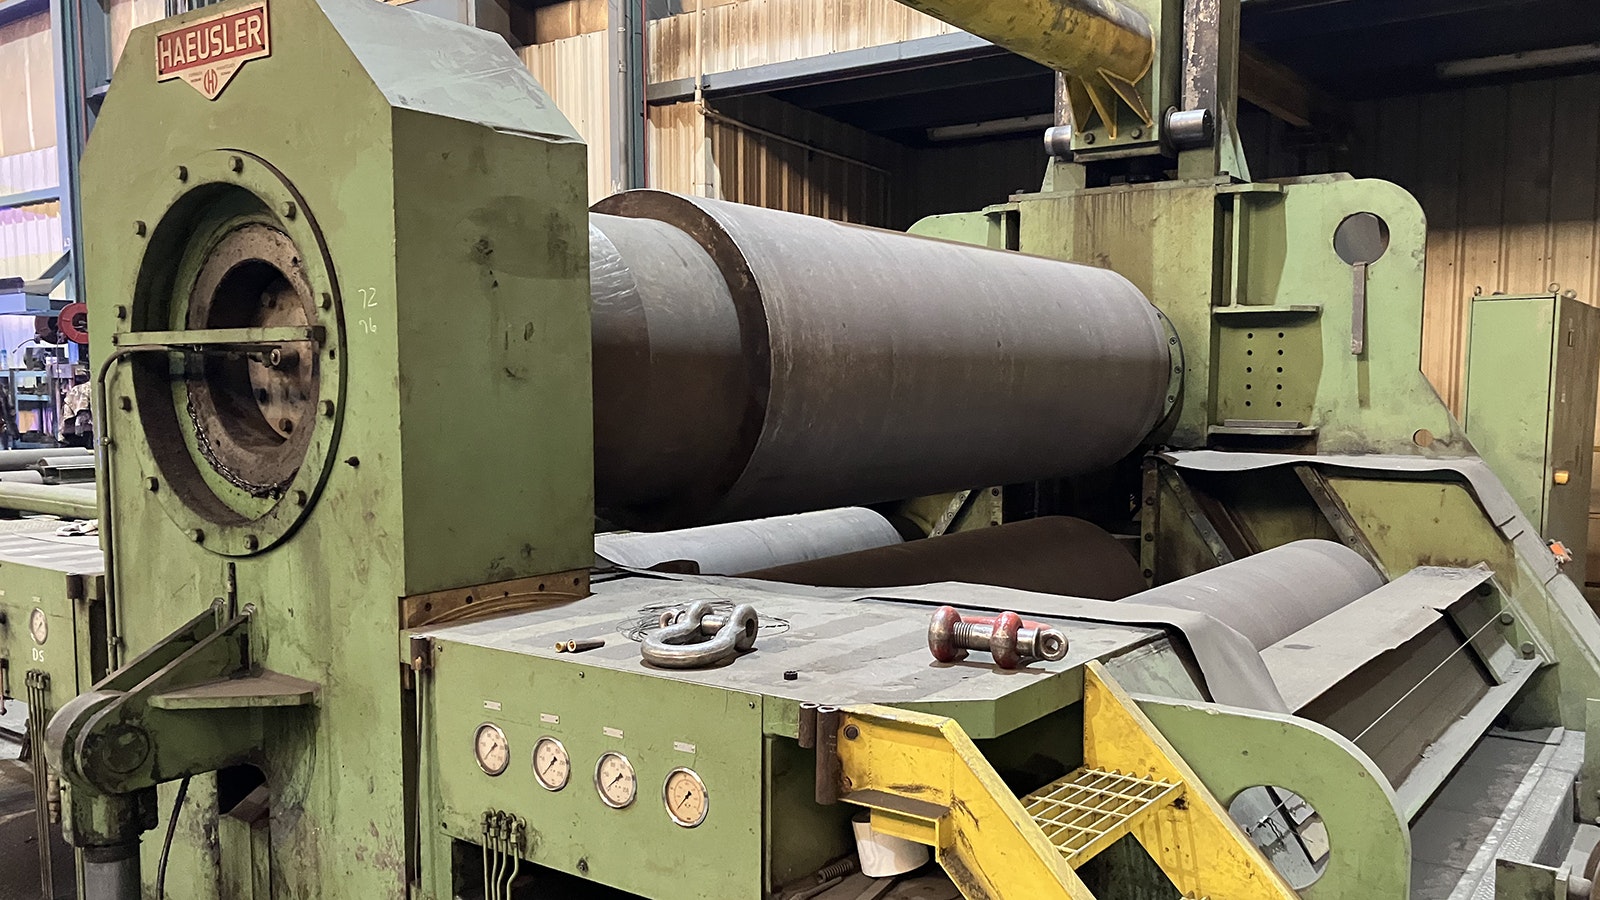 The 800,000-pound roller used by the plant can roll up to six-inch cold steel. It was purchased from a South African dock, and took 13 semi-trailers to deliver to Casper from a Houston port.